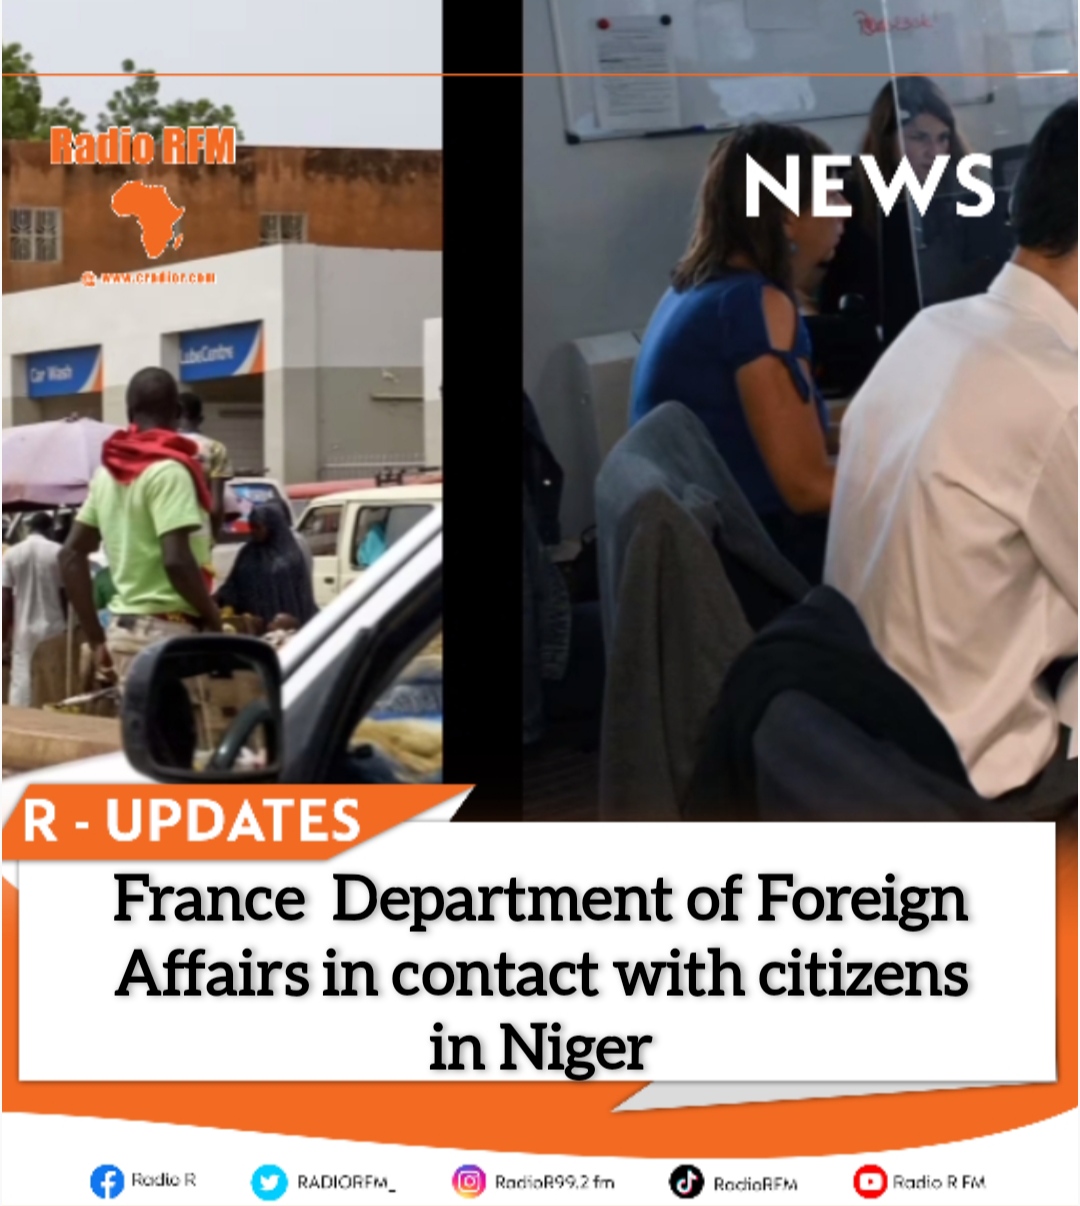 France Department of Foreign Affairs in contact with citizens in Niger..